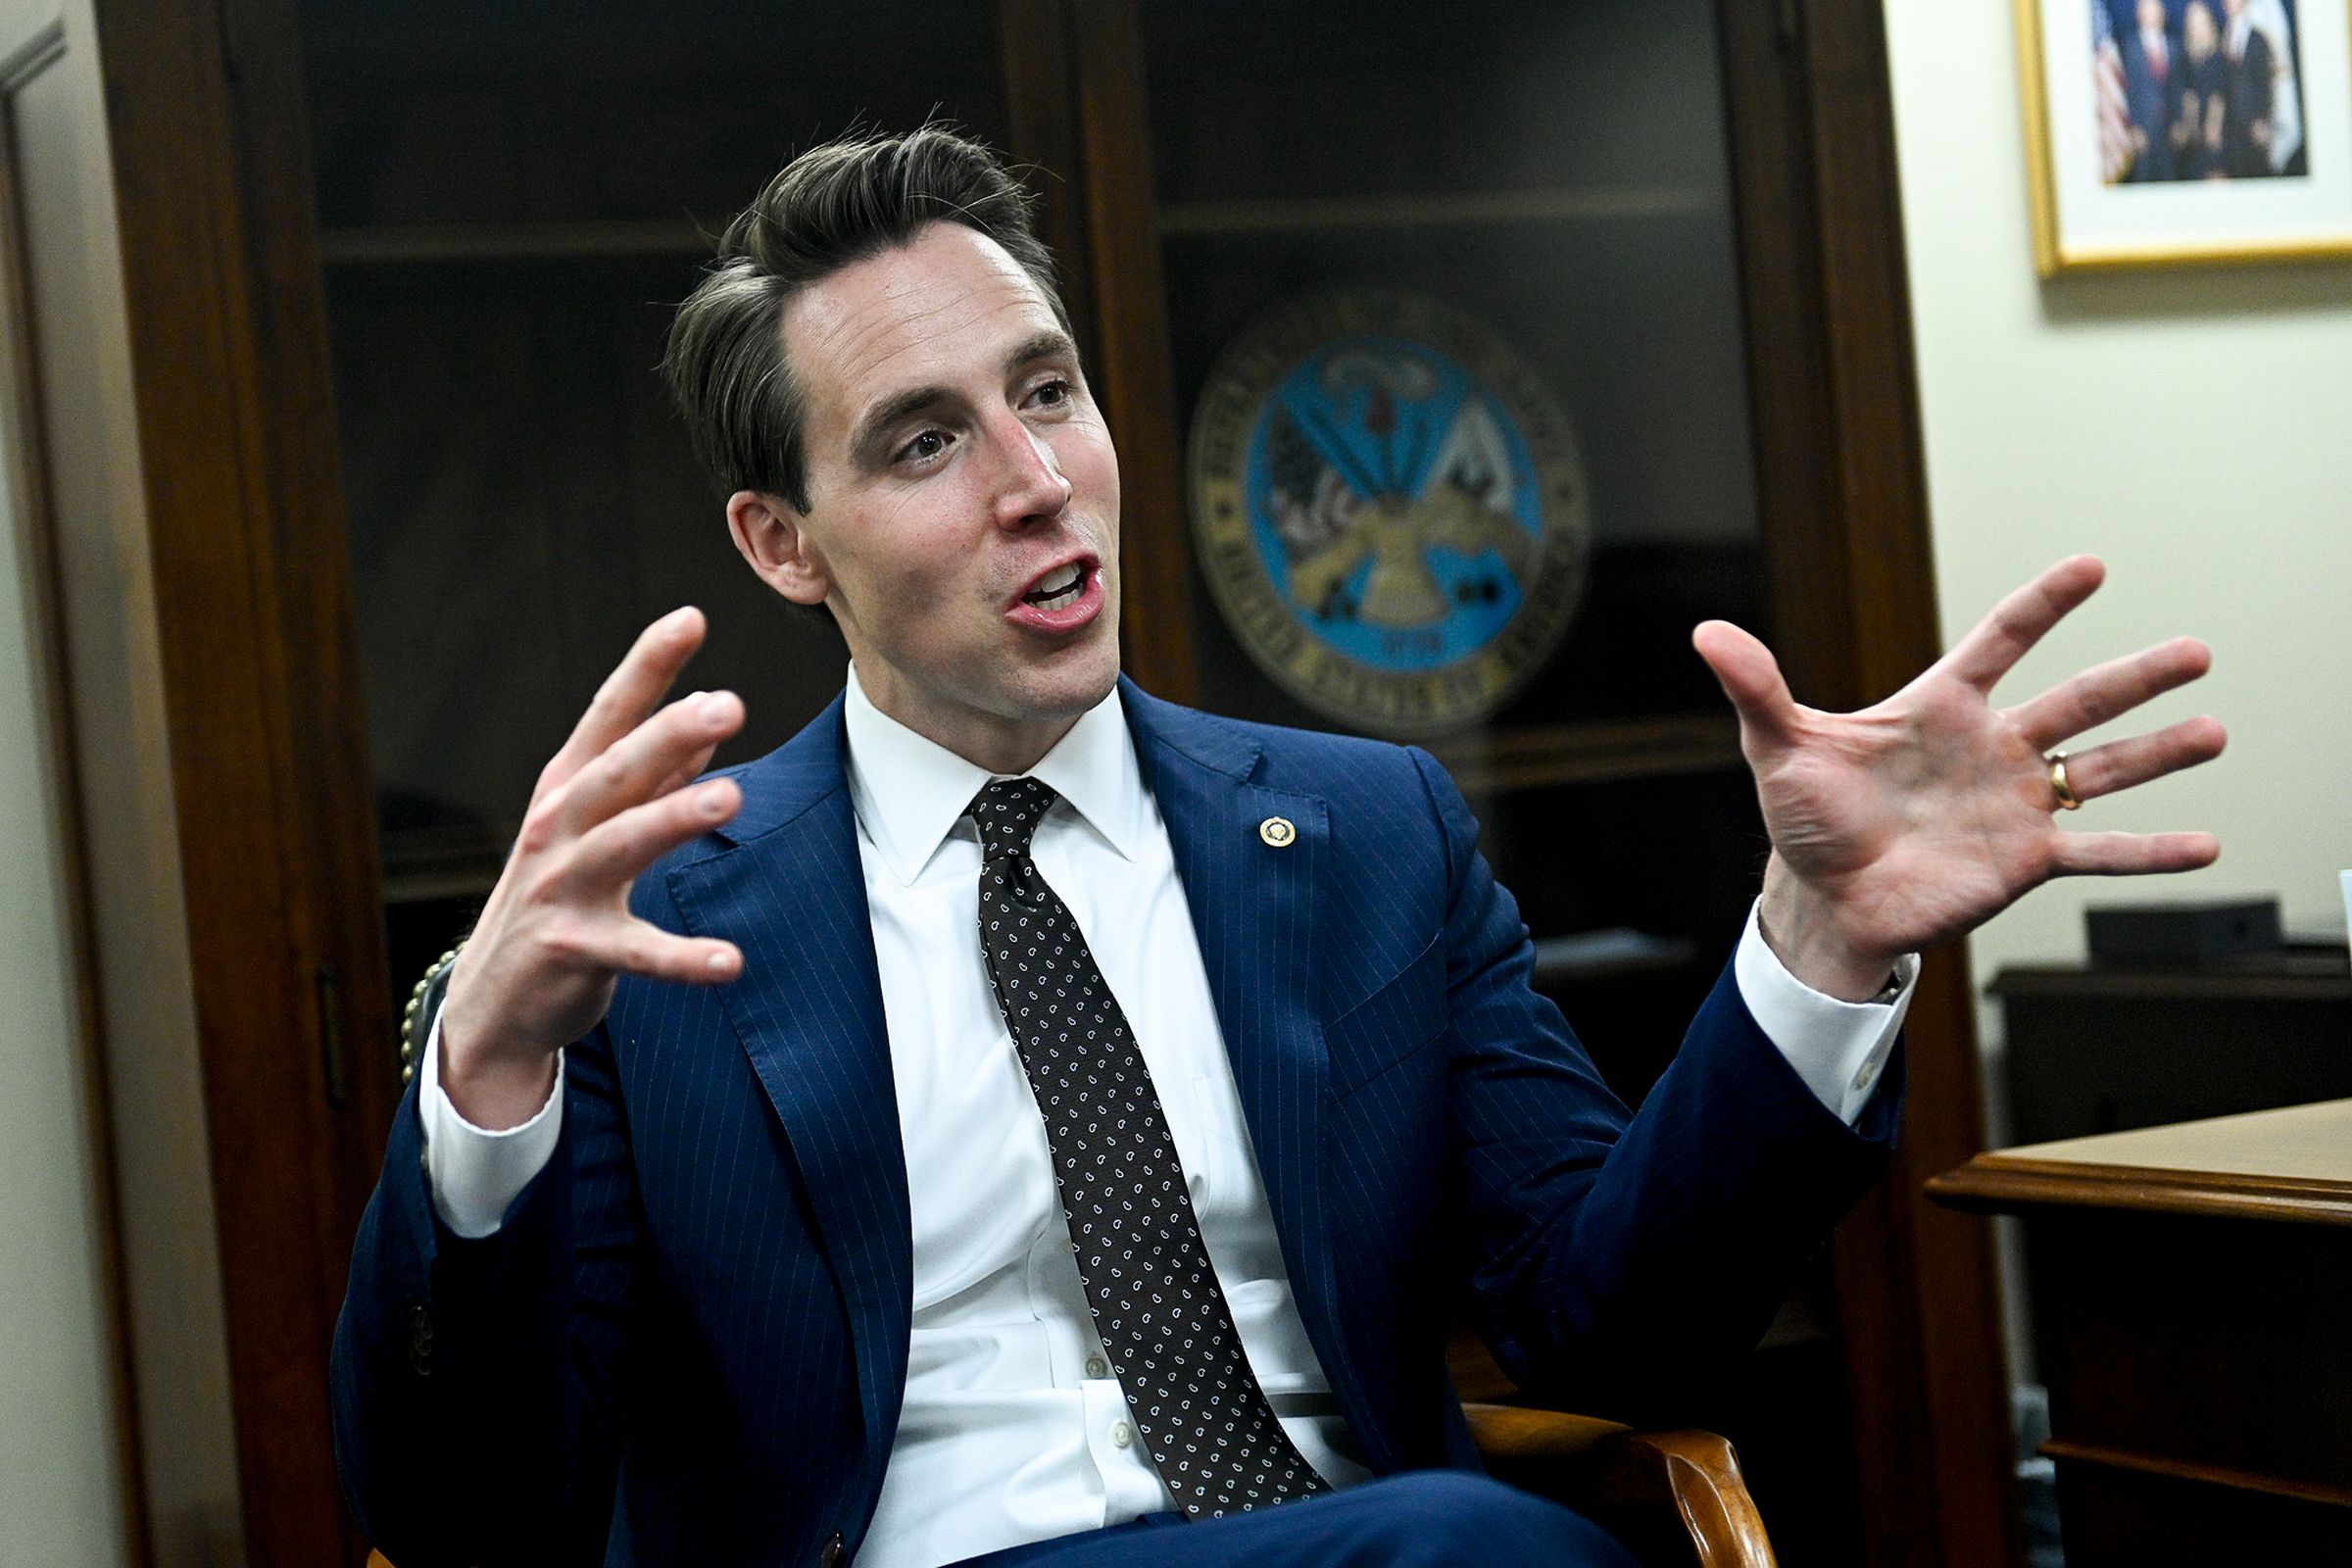 Sen. Josh Hawley (R-MO) is officially introducing his bill to ban the sale of loot boxes to minors today.